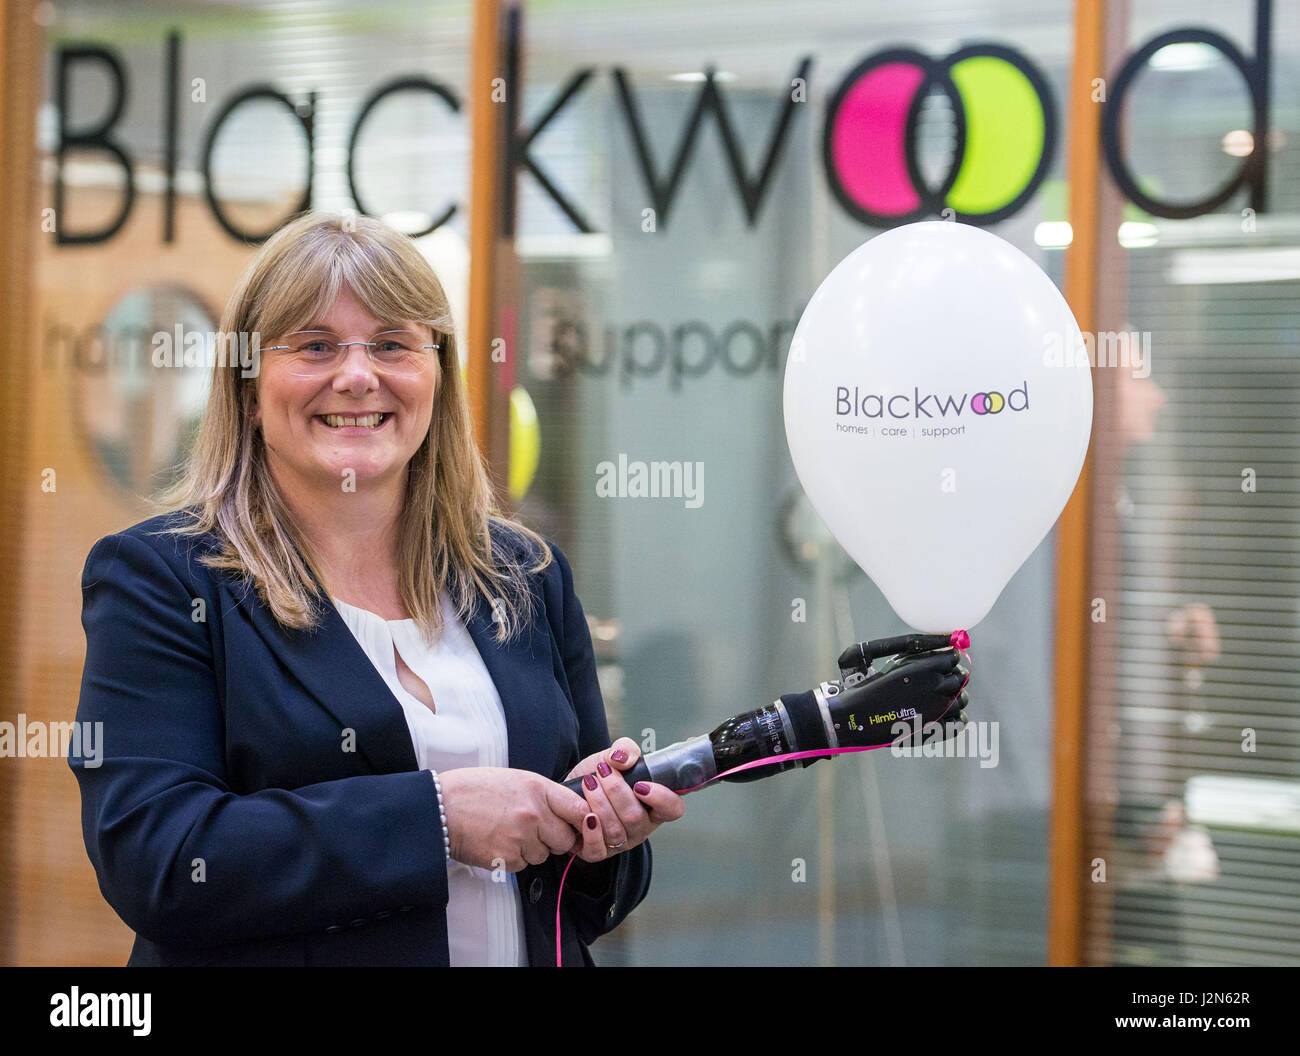 Sally Bowie marketing manager at Touch Bionics at the opening of the new Blackwood care and support offices a Stock Photo